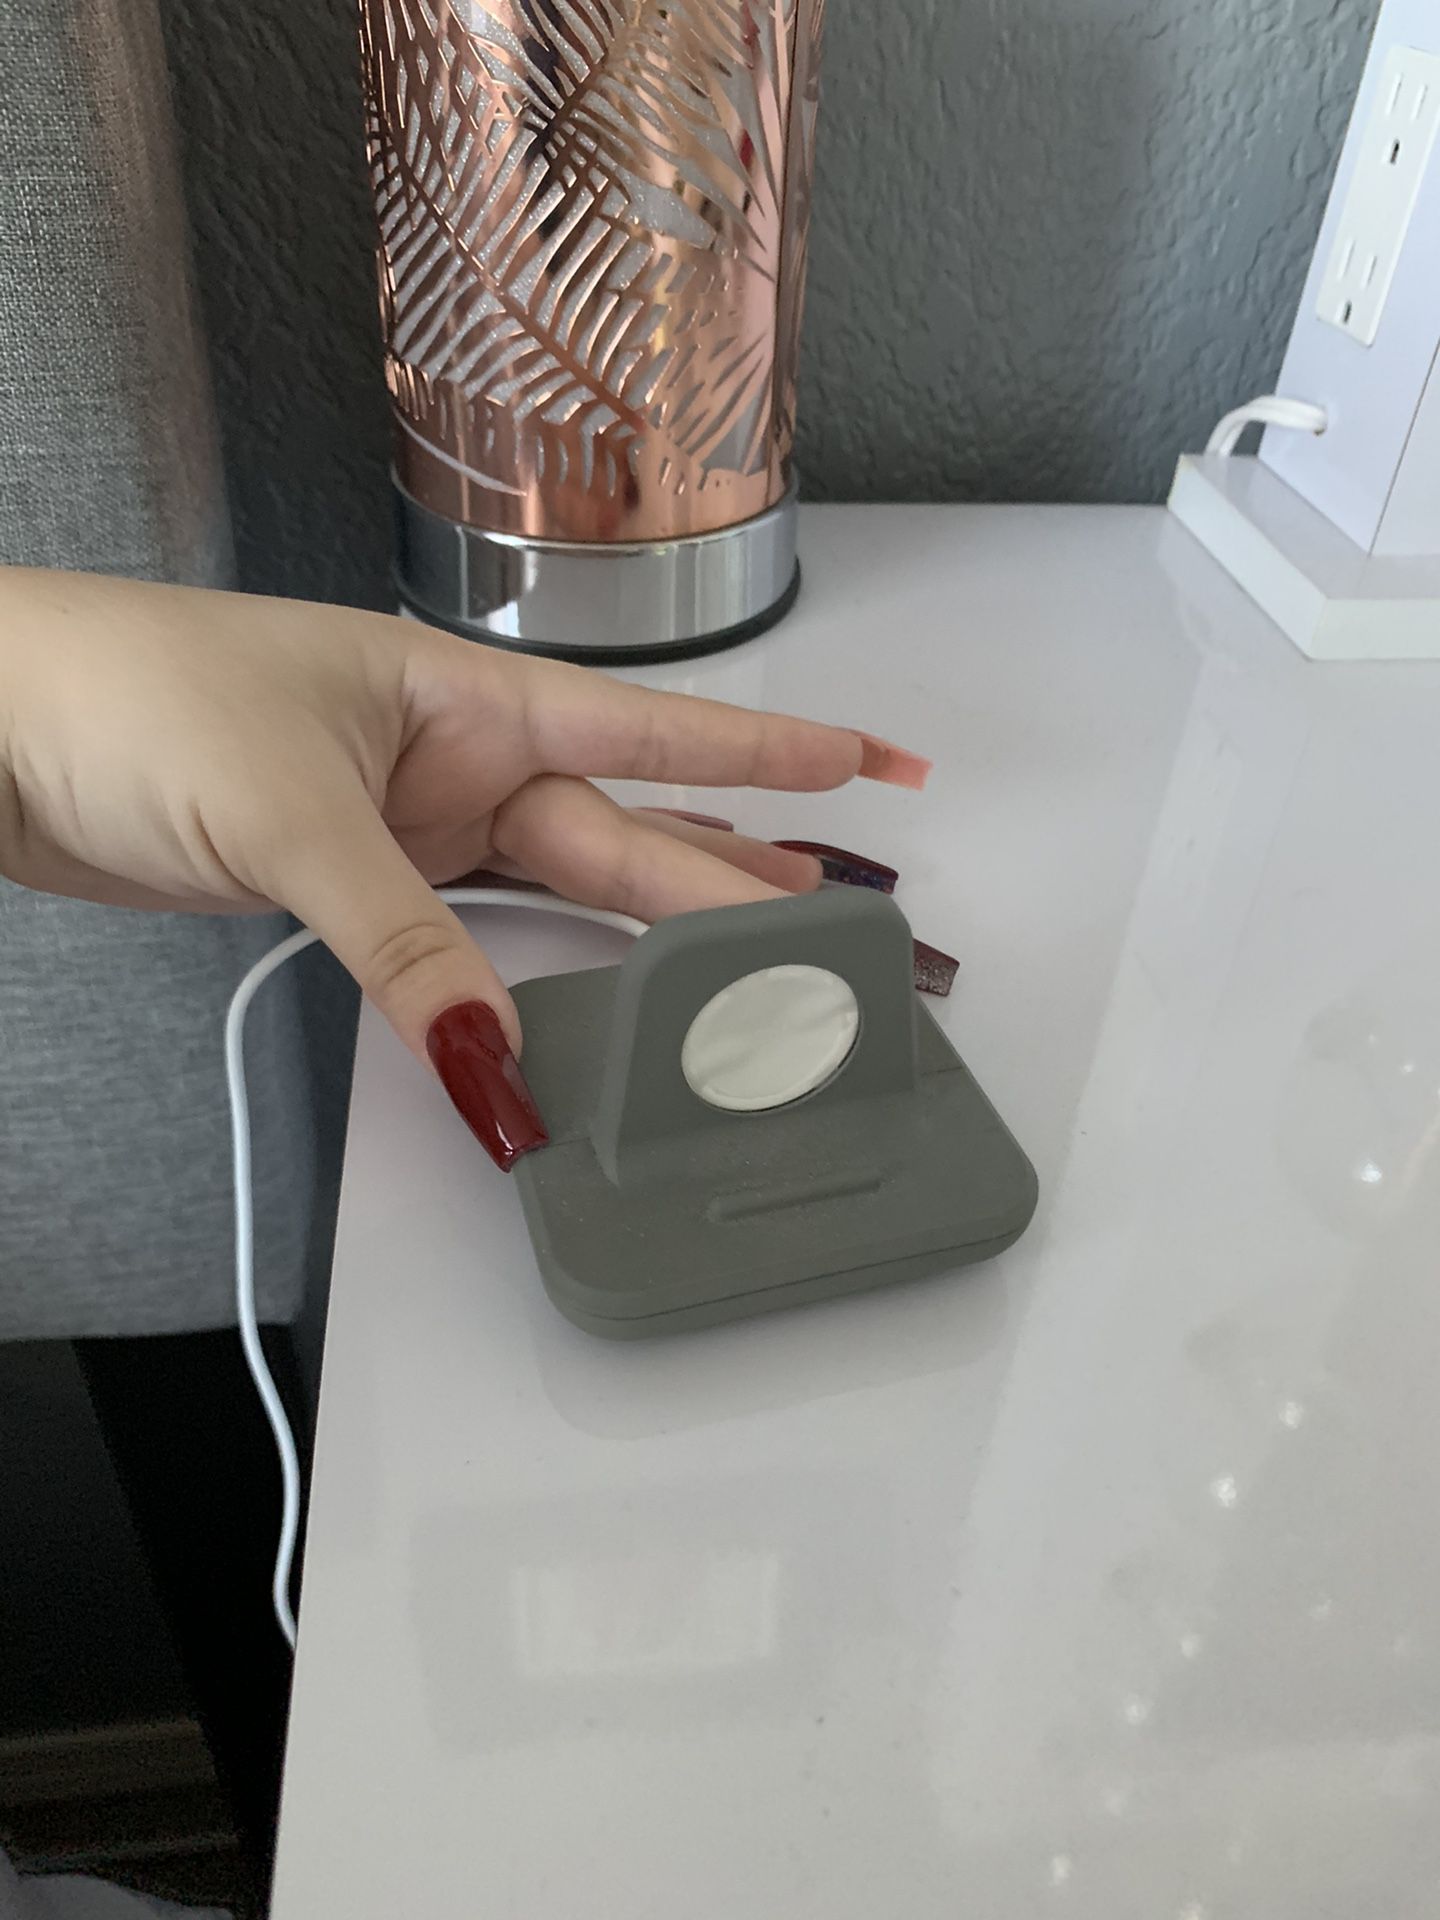 GREY CHARGING STAND FOR APPLE WATCH PENDING PICKUP